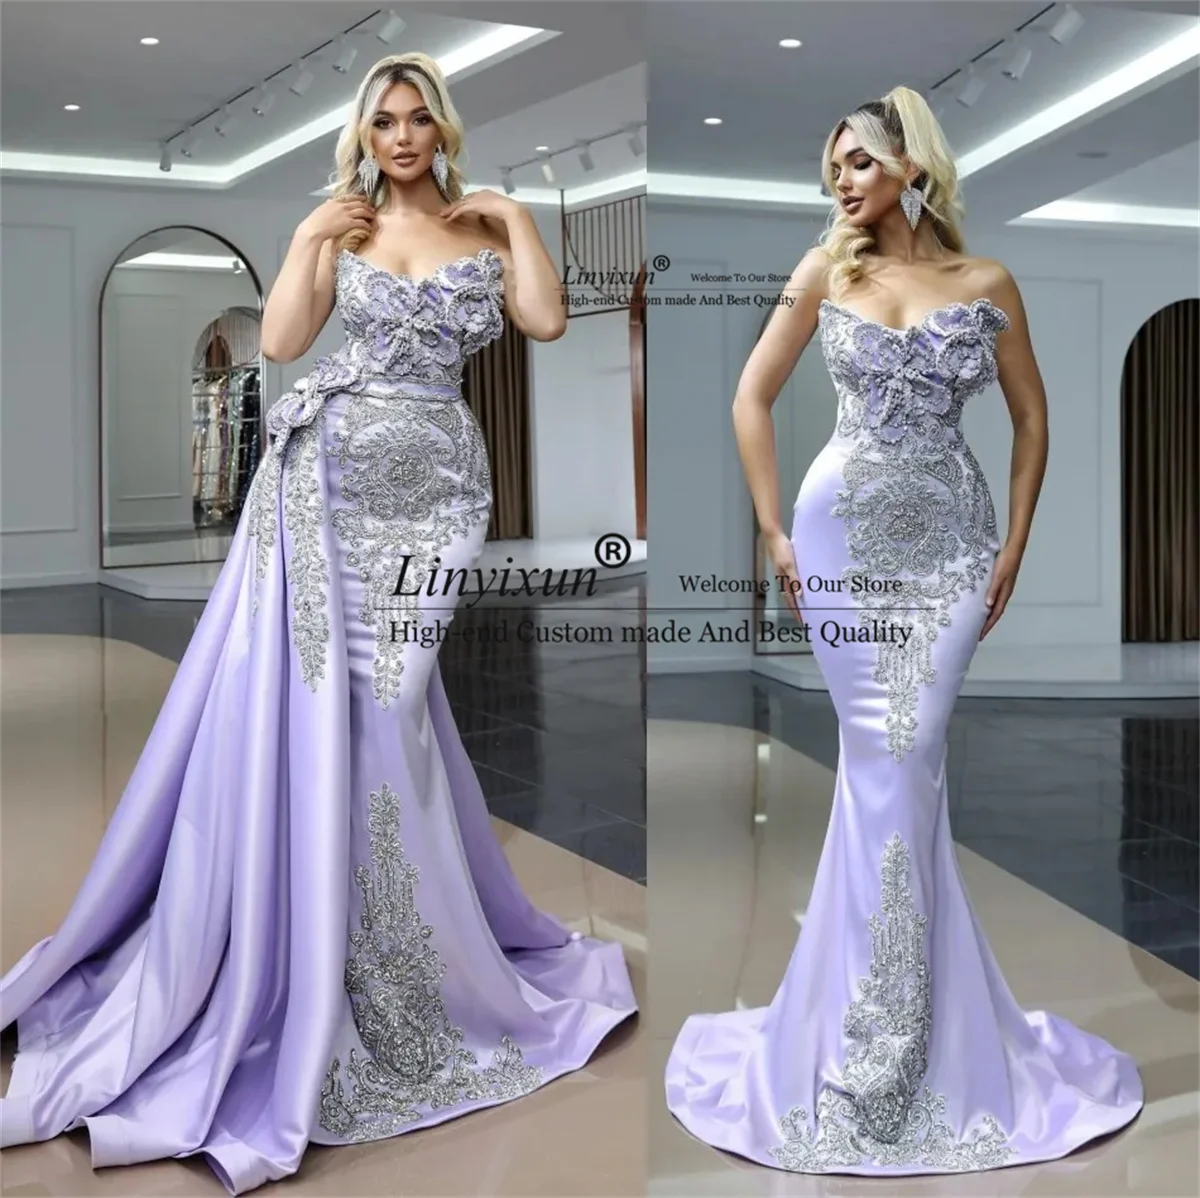 

Chic Mermaid Split Evening Dresses With Detachable Train Sweetheart Beaded Appliques Formal Arabic Prom Gowns Sexy Patry Dress